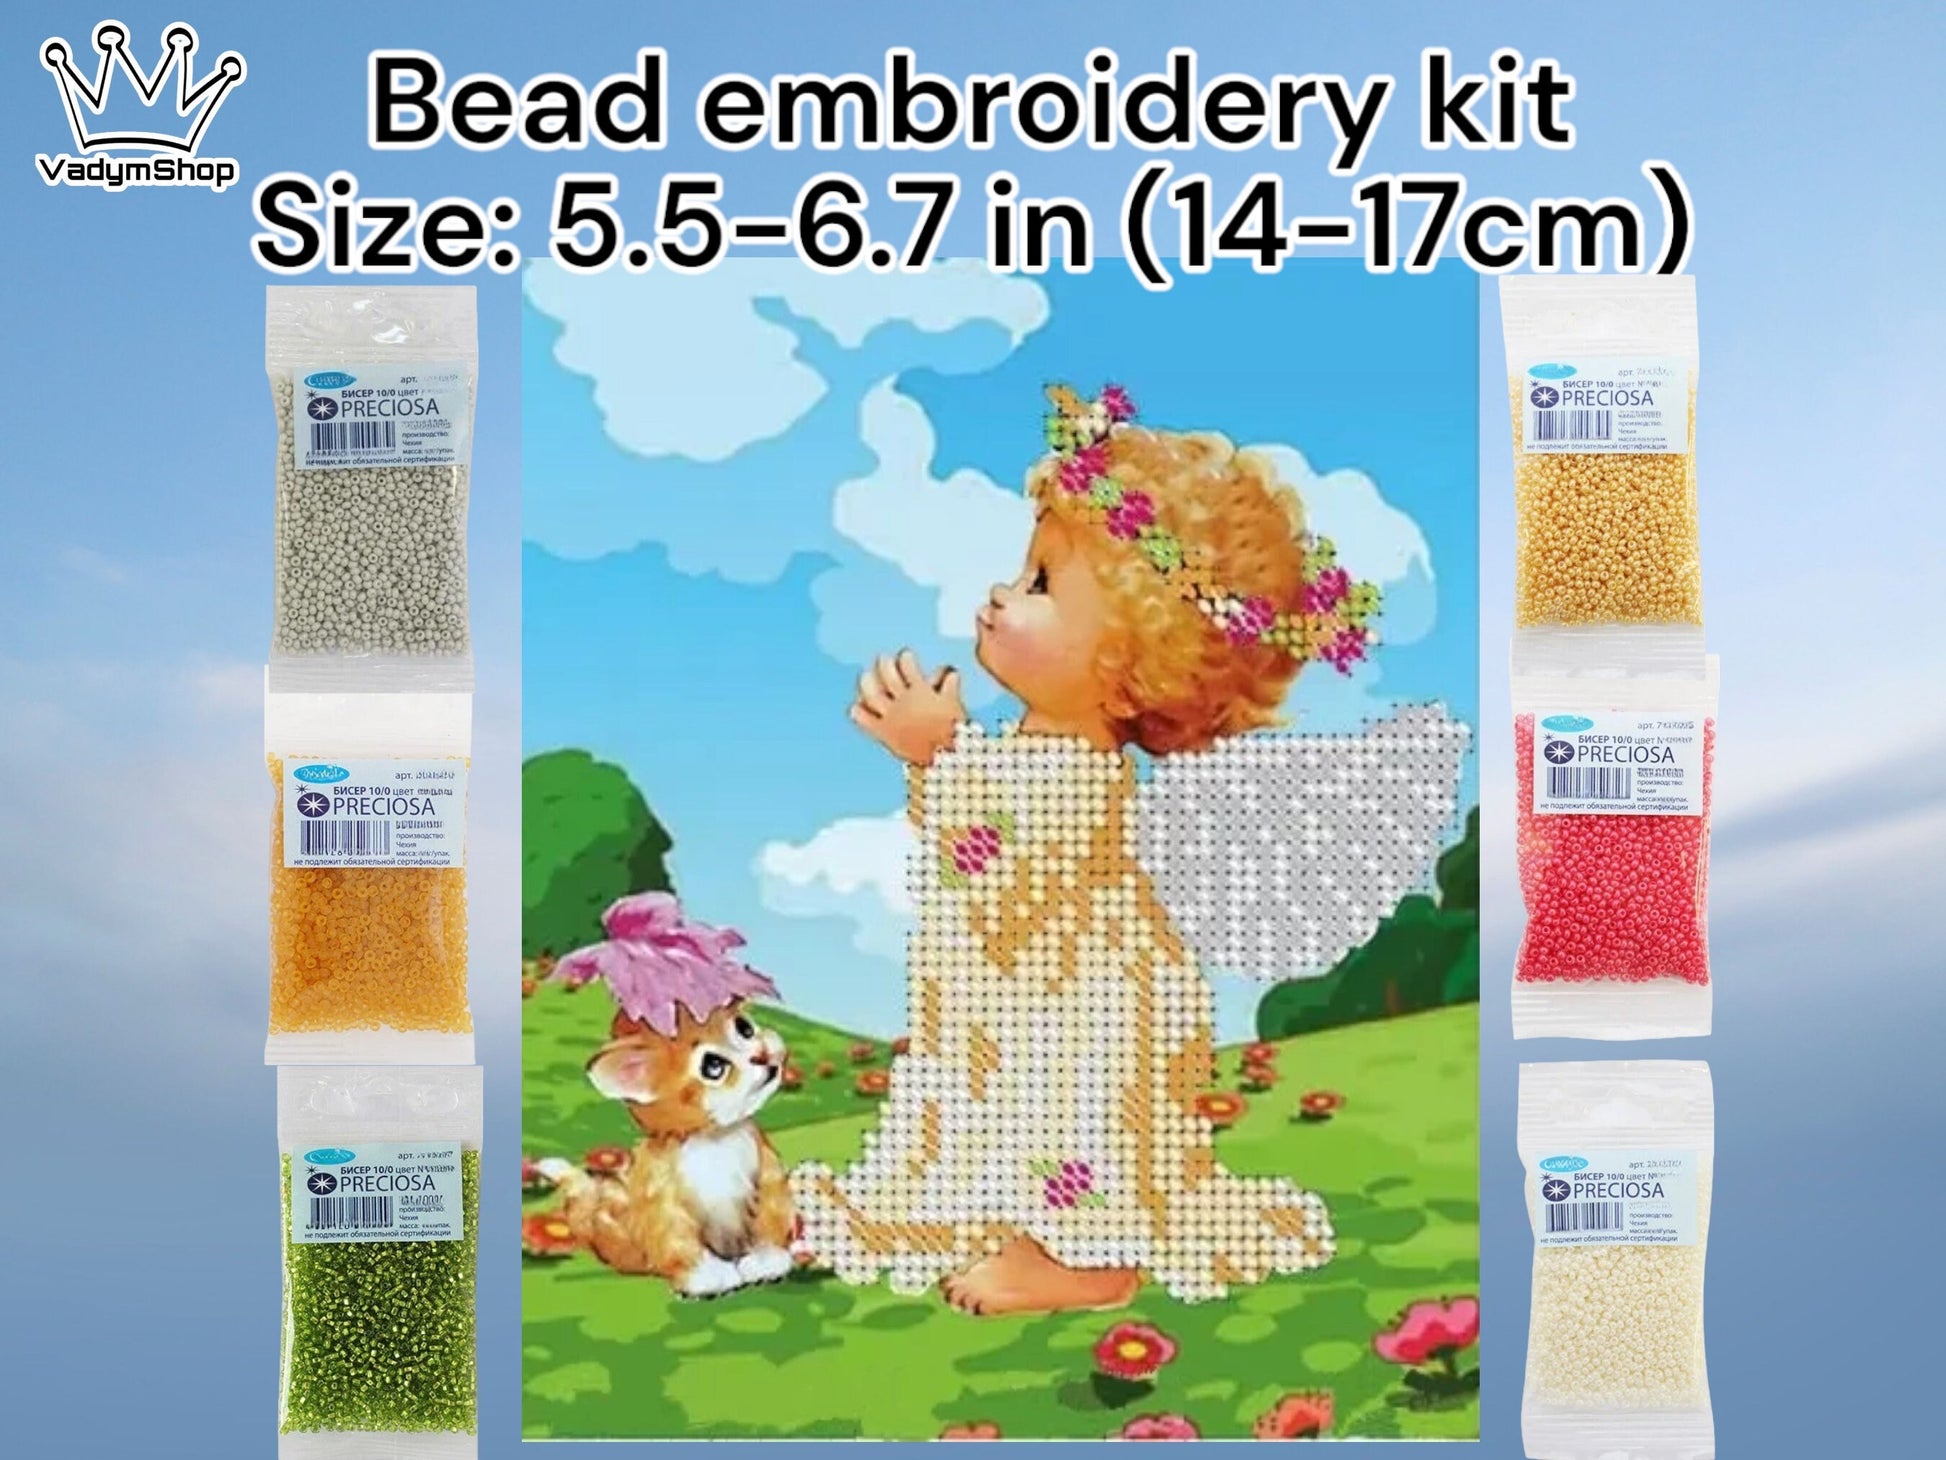 Small Bead embroidery kit "Angel prayer". Size: 5.5-6.7 in (14-17cm) - VadymShop